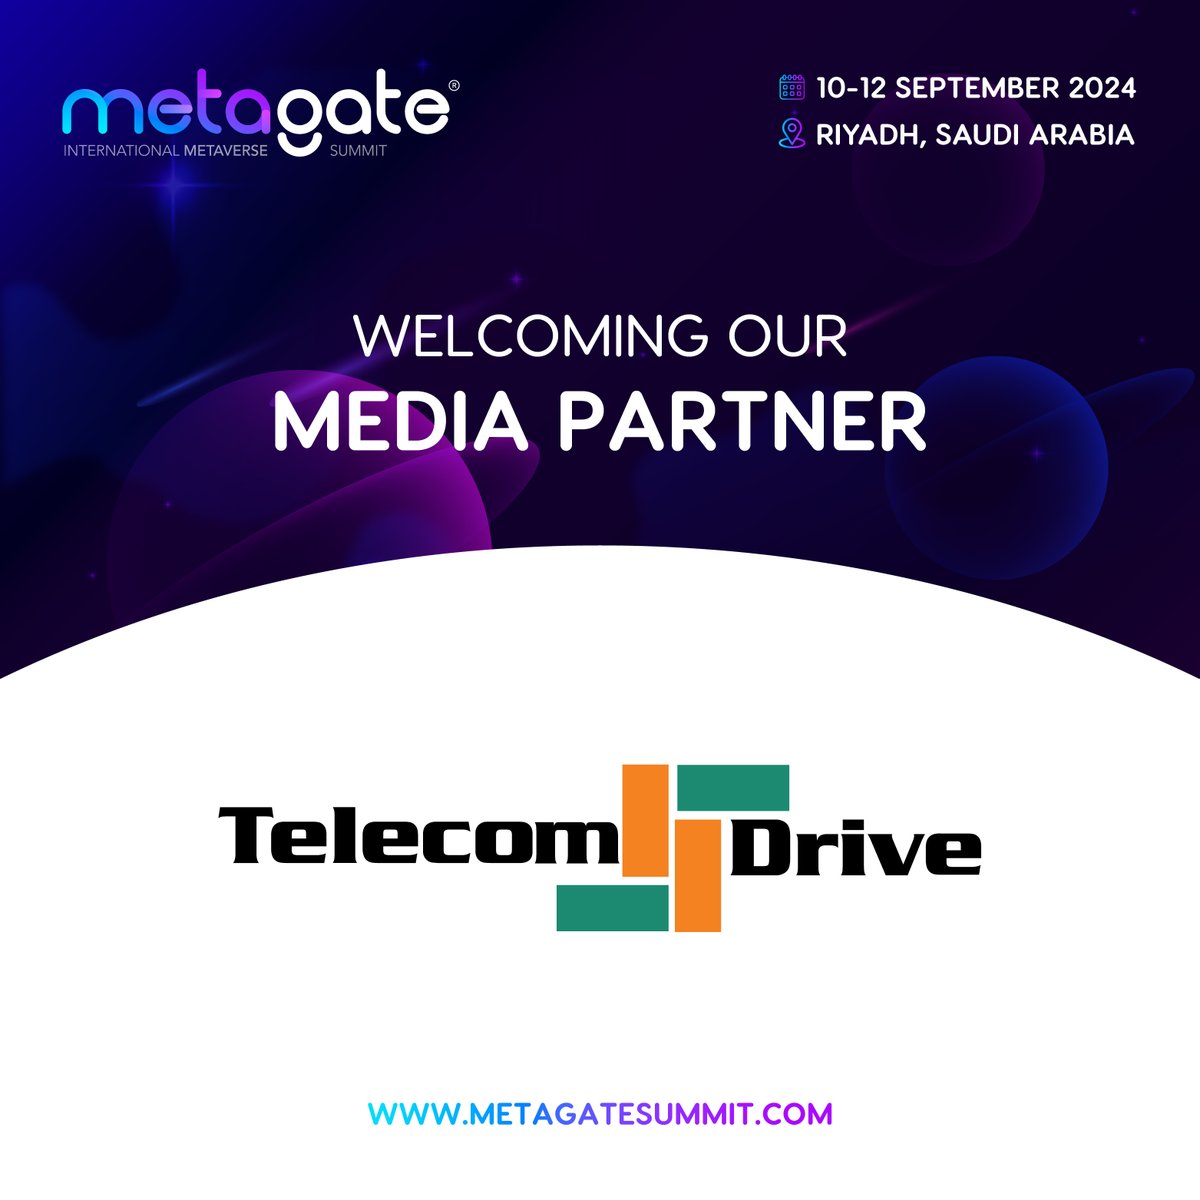 Welcoming @telecomdrive , a unique content-focused platform connecting #telecom stakeholders globally as our new Media Partner! 🤝  
Ready to join us at #MetaGate? Book your space or sponsorship now! 
#metagate #immersivetechnologies #GlobalConnectivity #Innovation